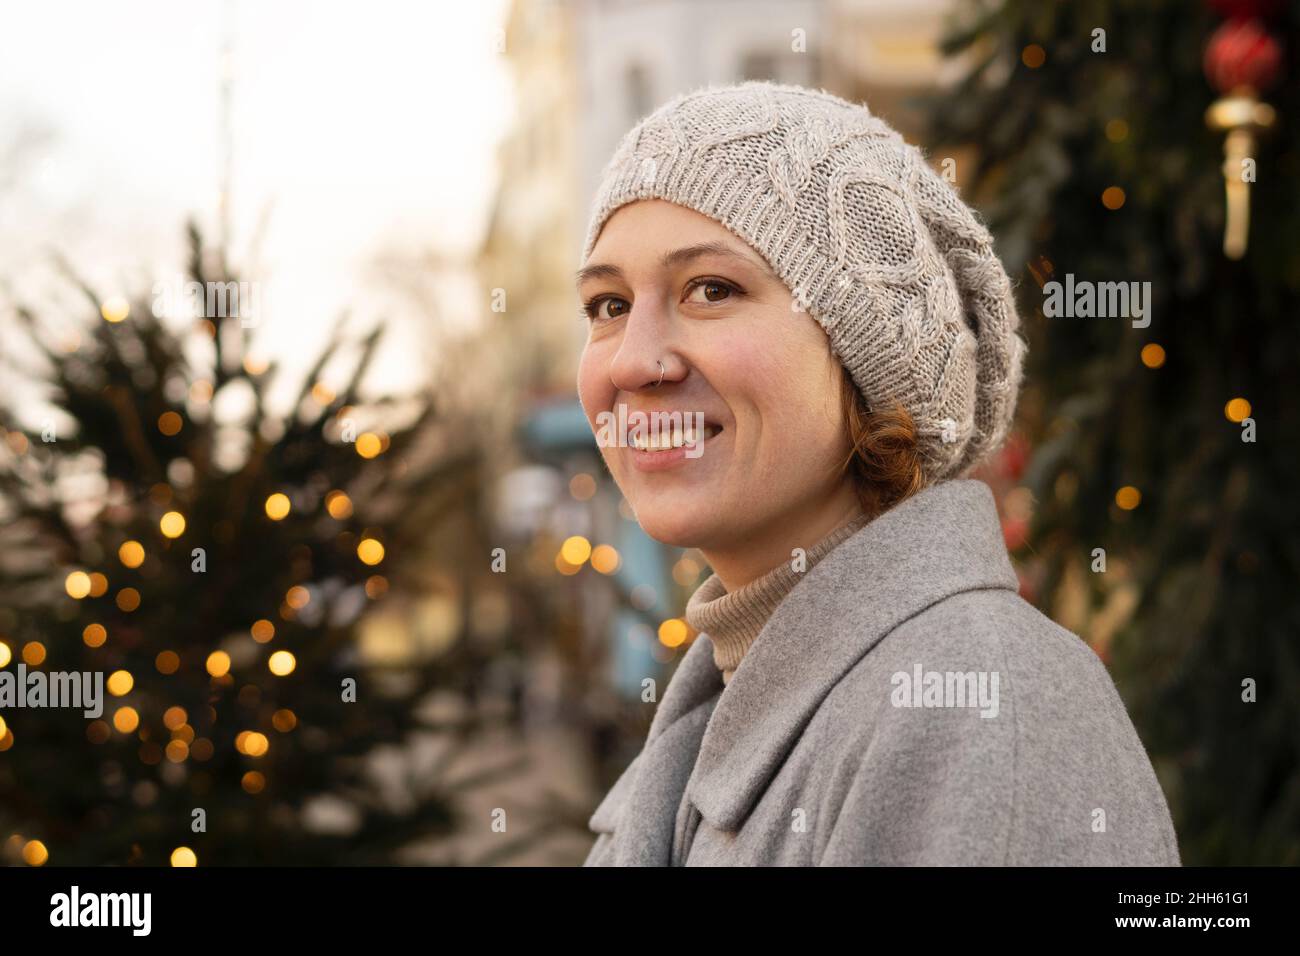 Contemplative woman with knit hat by christmas trees Stock Photo